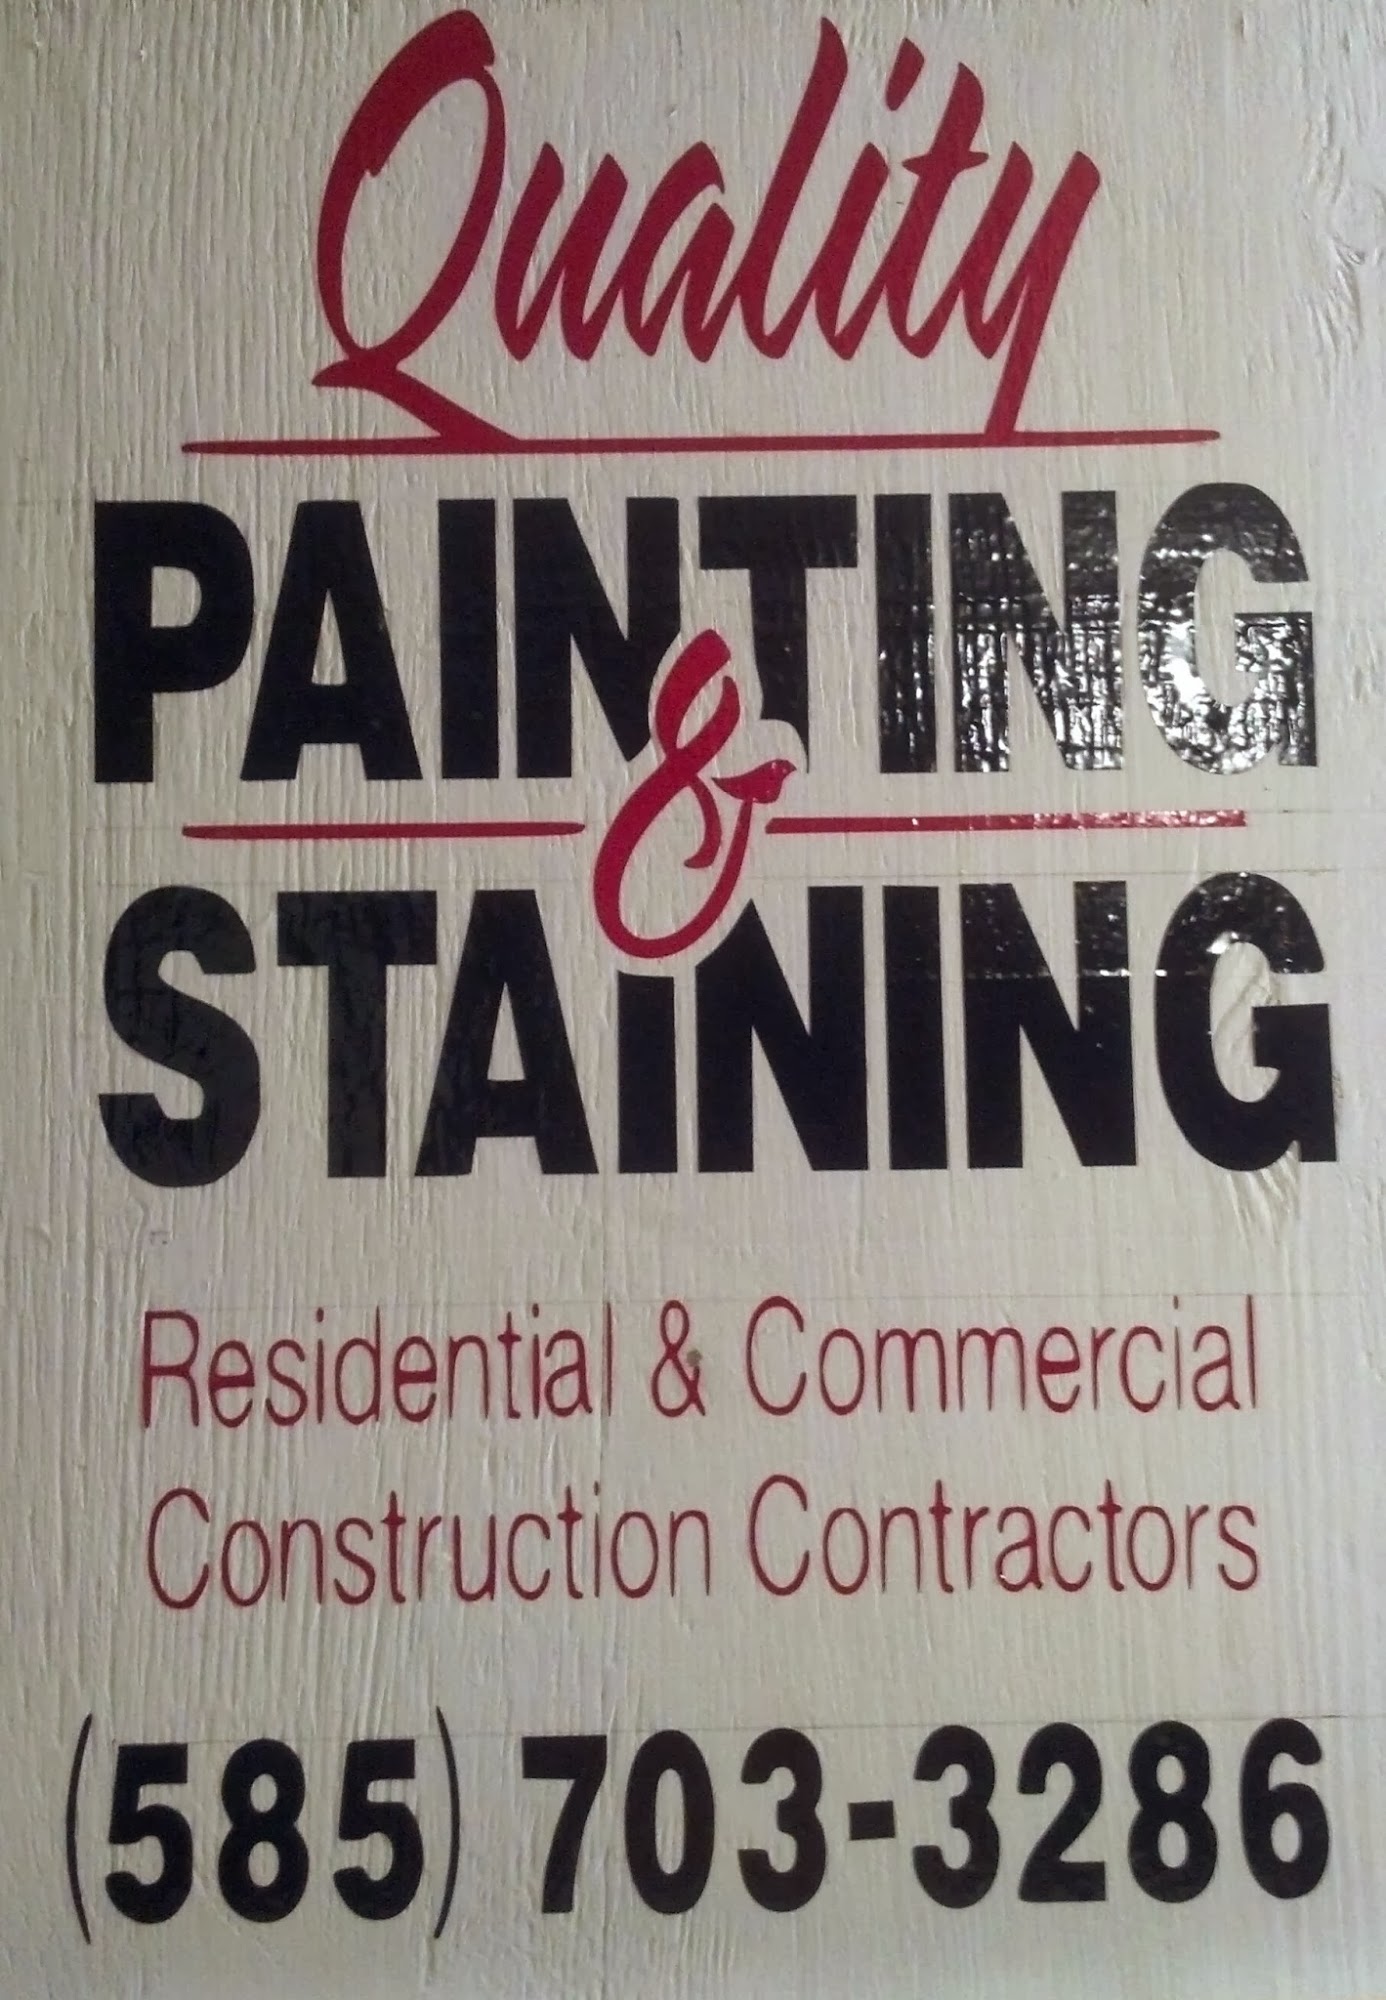 Quality Painting & Staining 7042 W Main Rd L47, Lima New York 14485